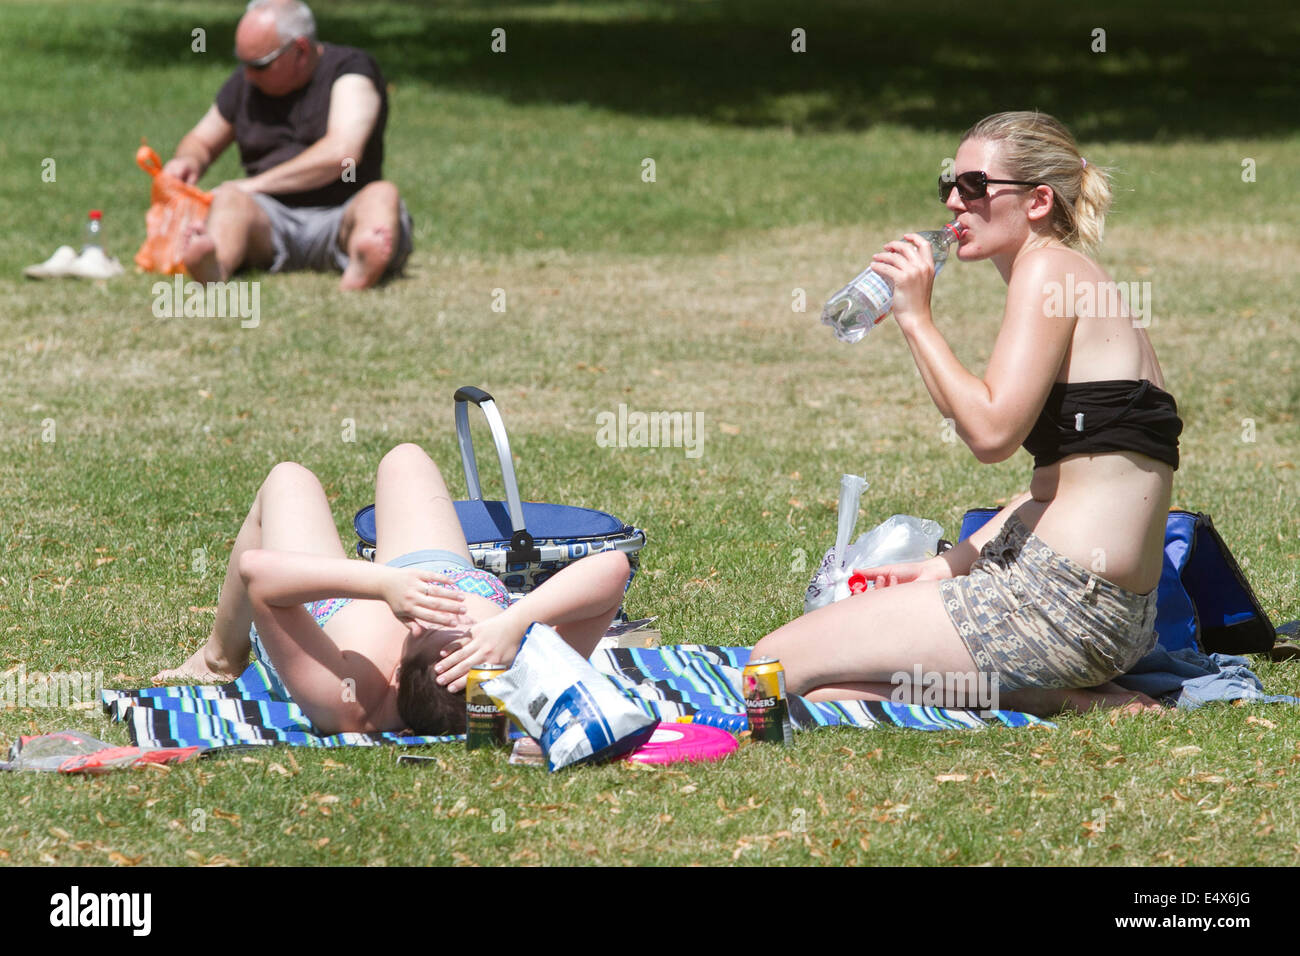 London UK. 17th July 2014. women sunbathing  in Regent's Park  despite a heatwave warning being issued on the hottest day so far as temperatures are forecast to rise to 30 degrees celcius Credit:  amer ghazzal/Alamy Live News Stock Photo